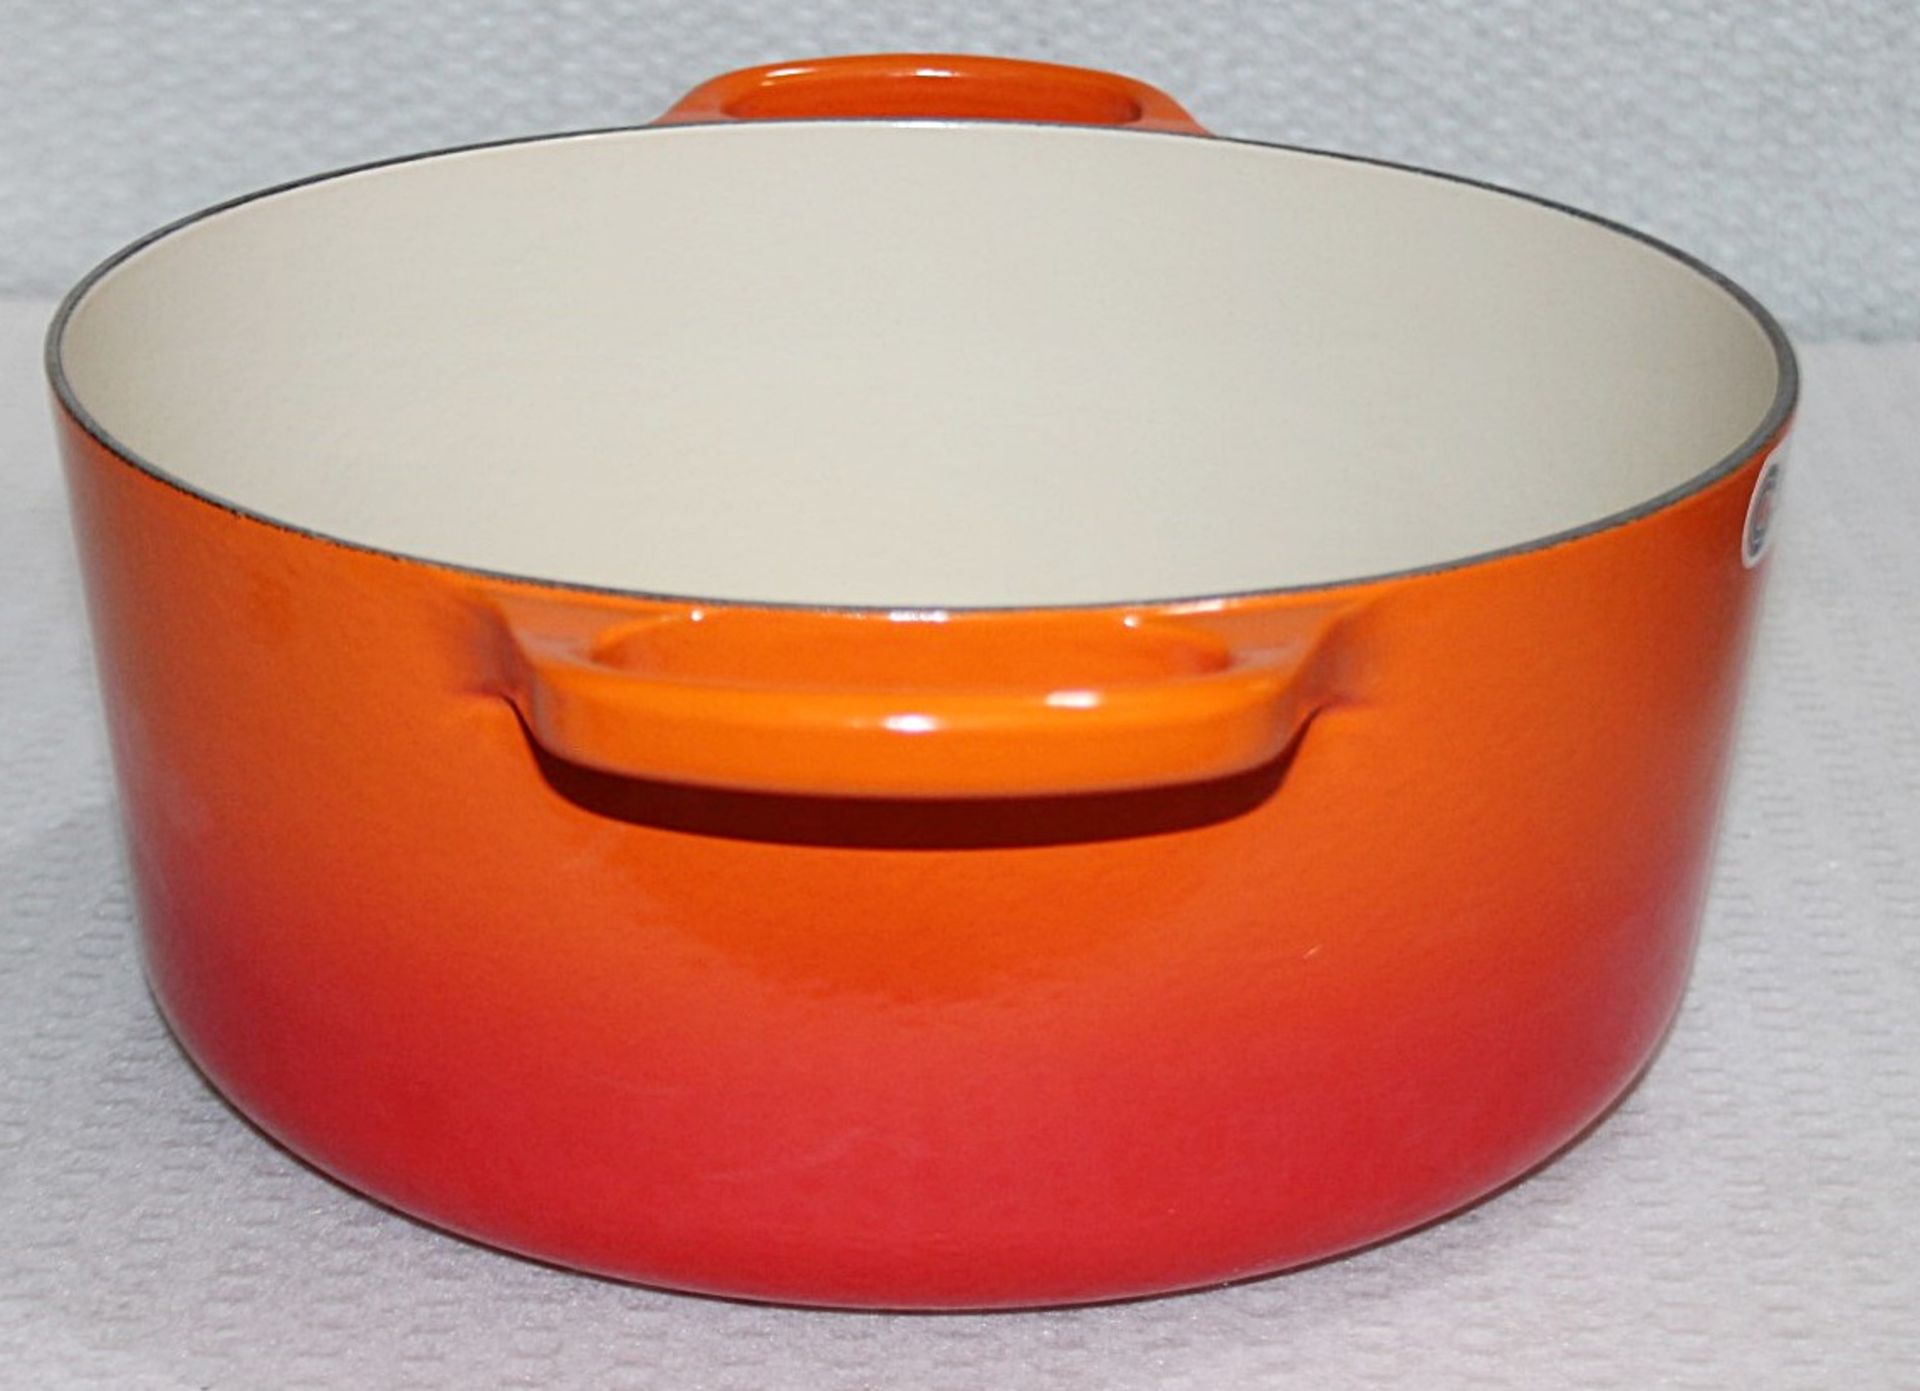 1 x LE CREUSET 'Volcanic' Enamelled Cast Iron Round Casserole Dish With Lid (30cm) - RRP £355.00 - Image 6 of 13